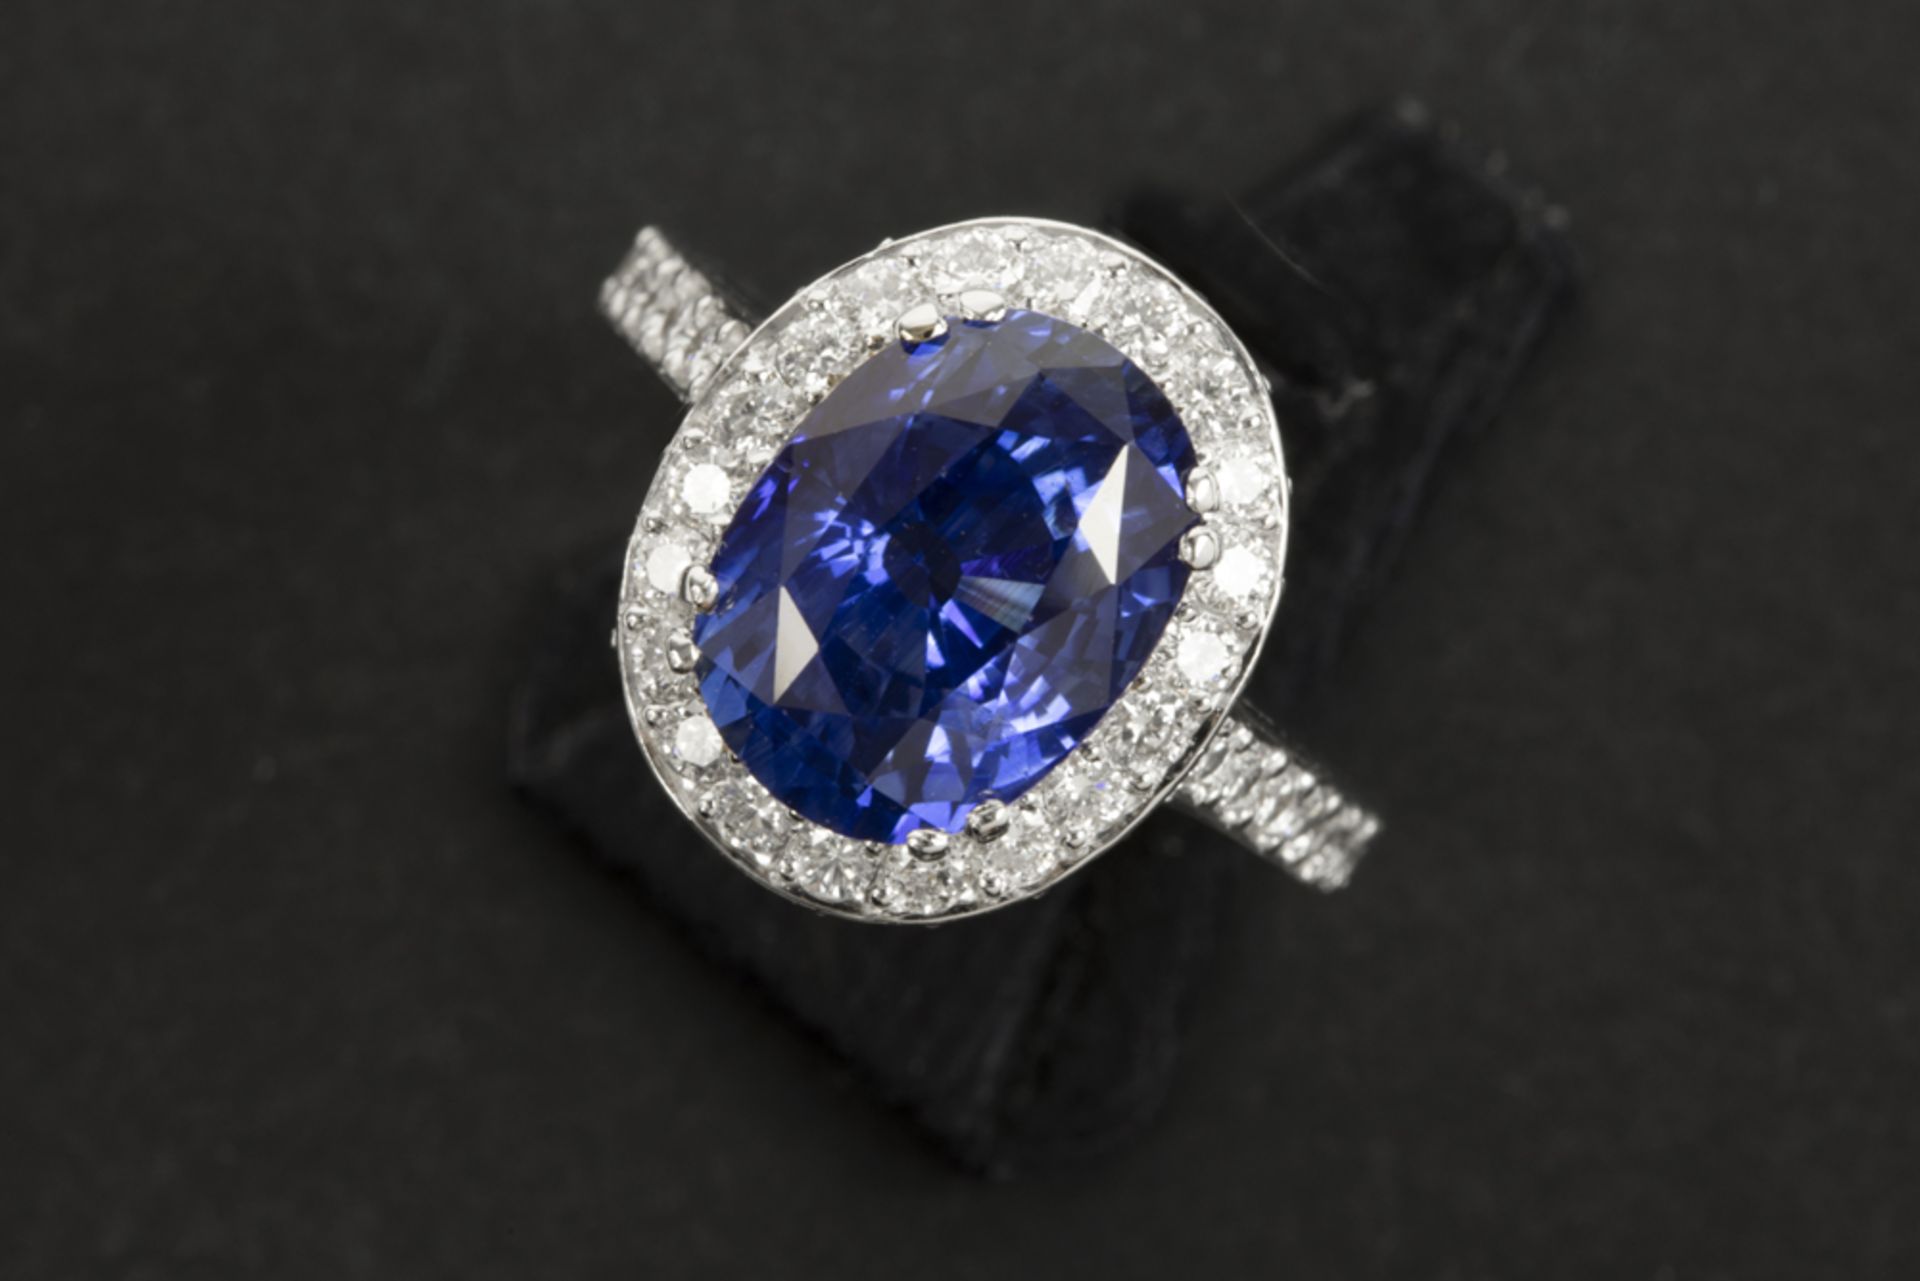 beautiful ring in white gold (18 carat) with a superb intense blue sapphire of 4,98 carat from